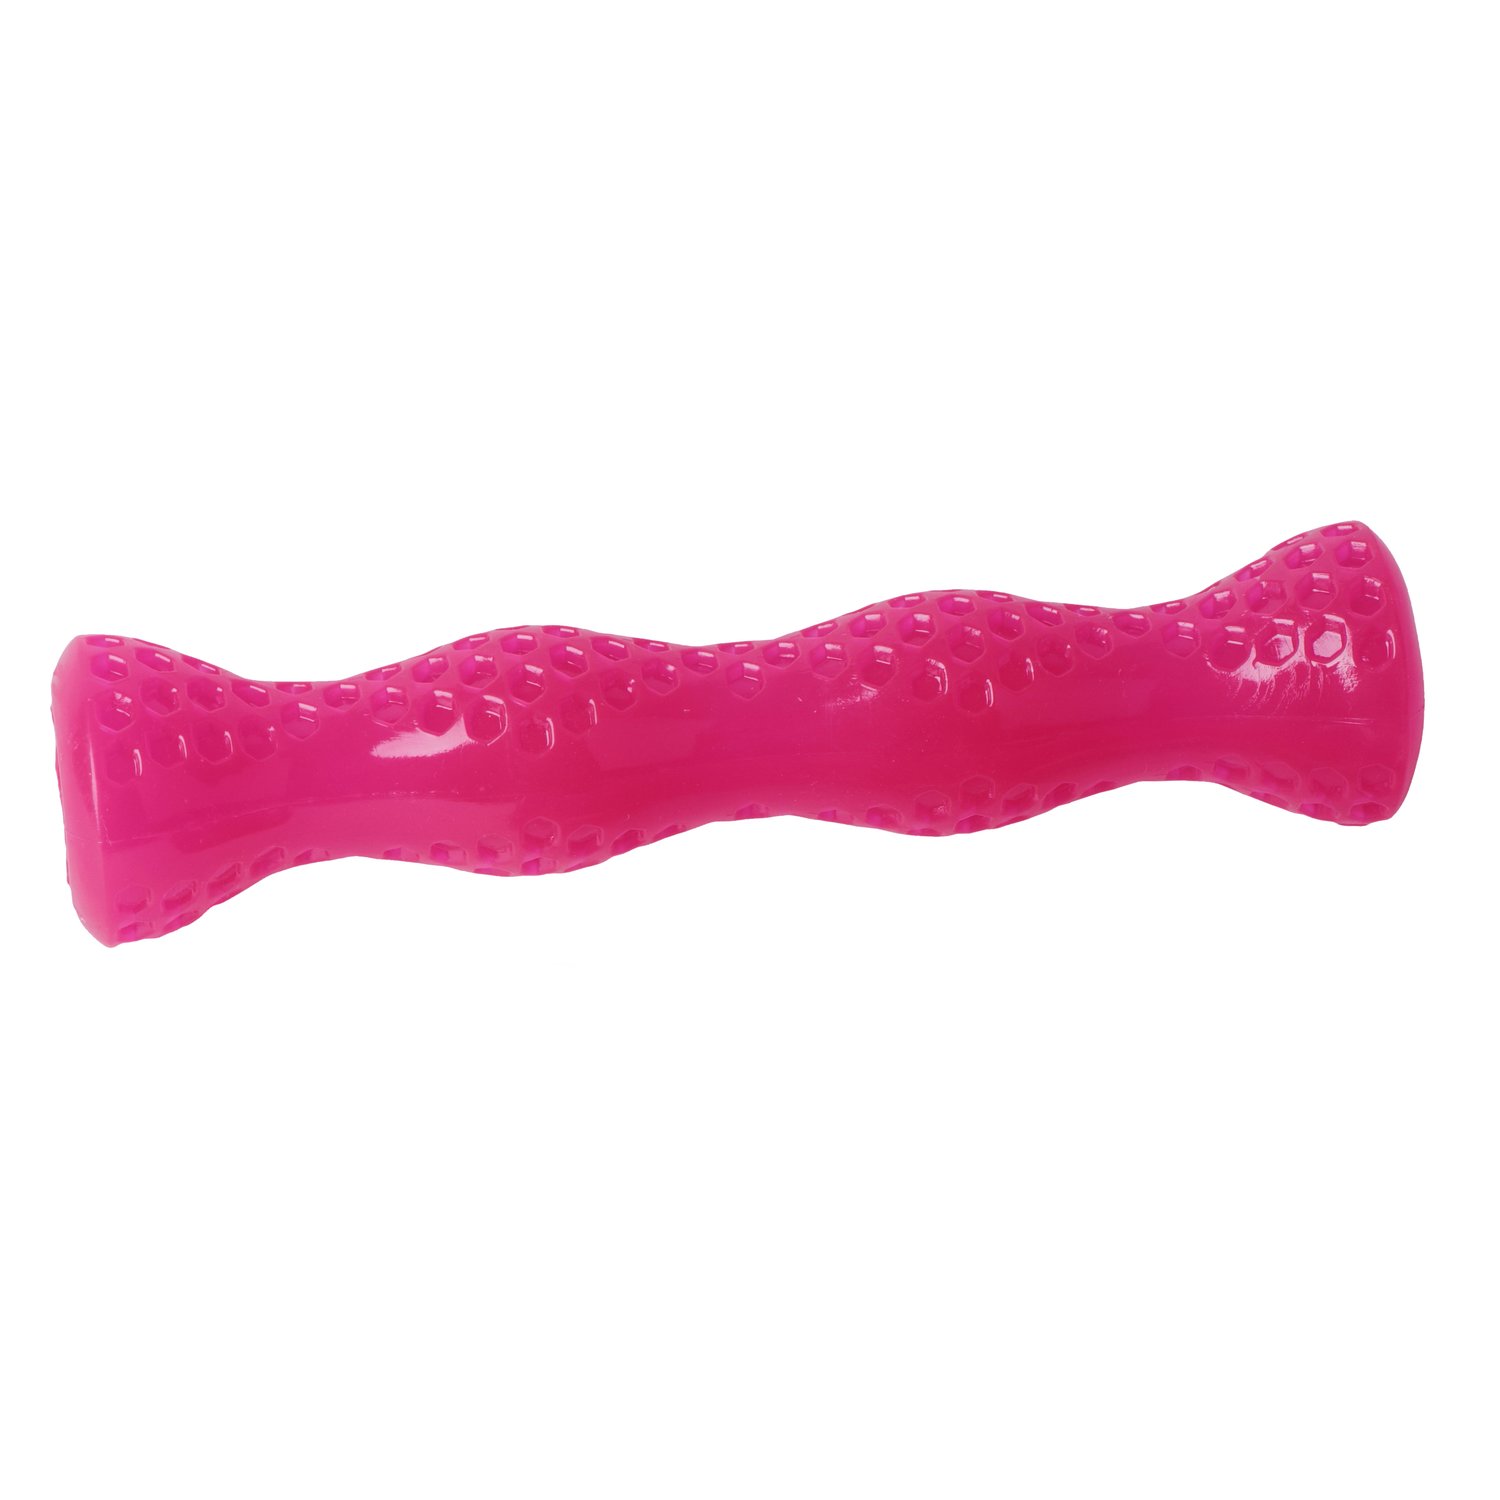 Bubimex Hundespielzeug Super Strong 25 cm